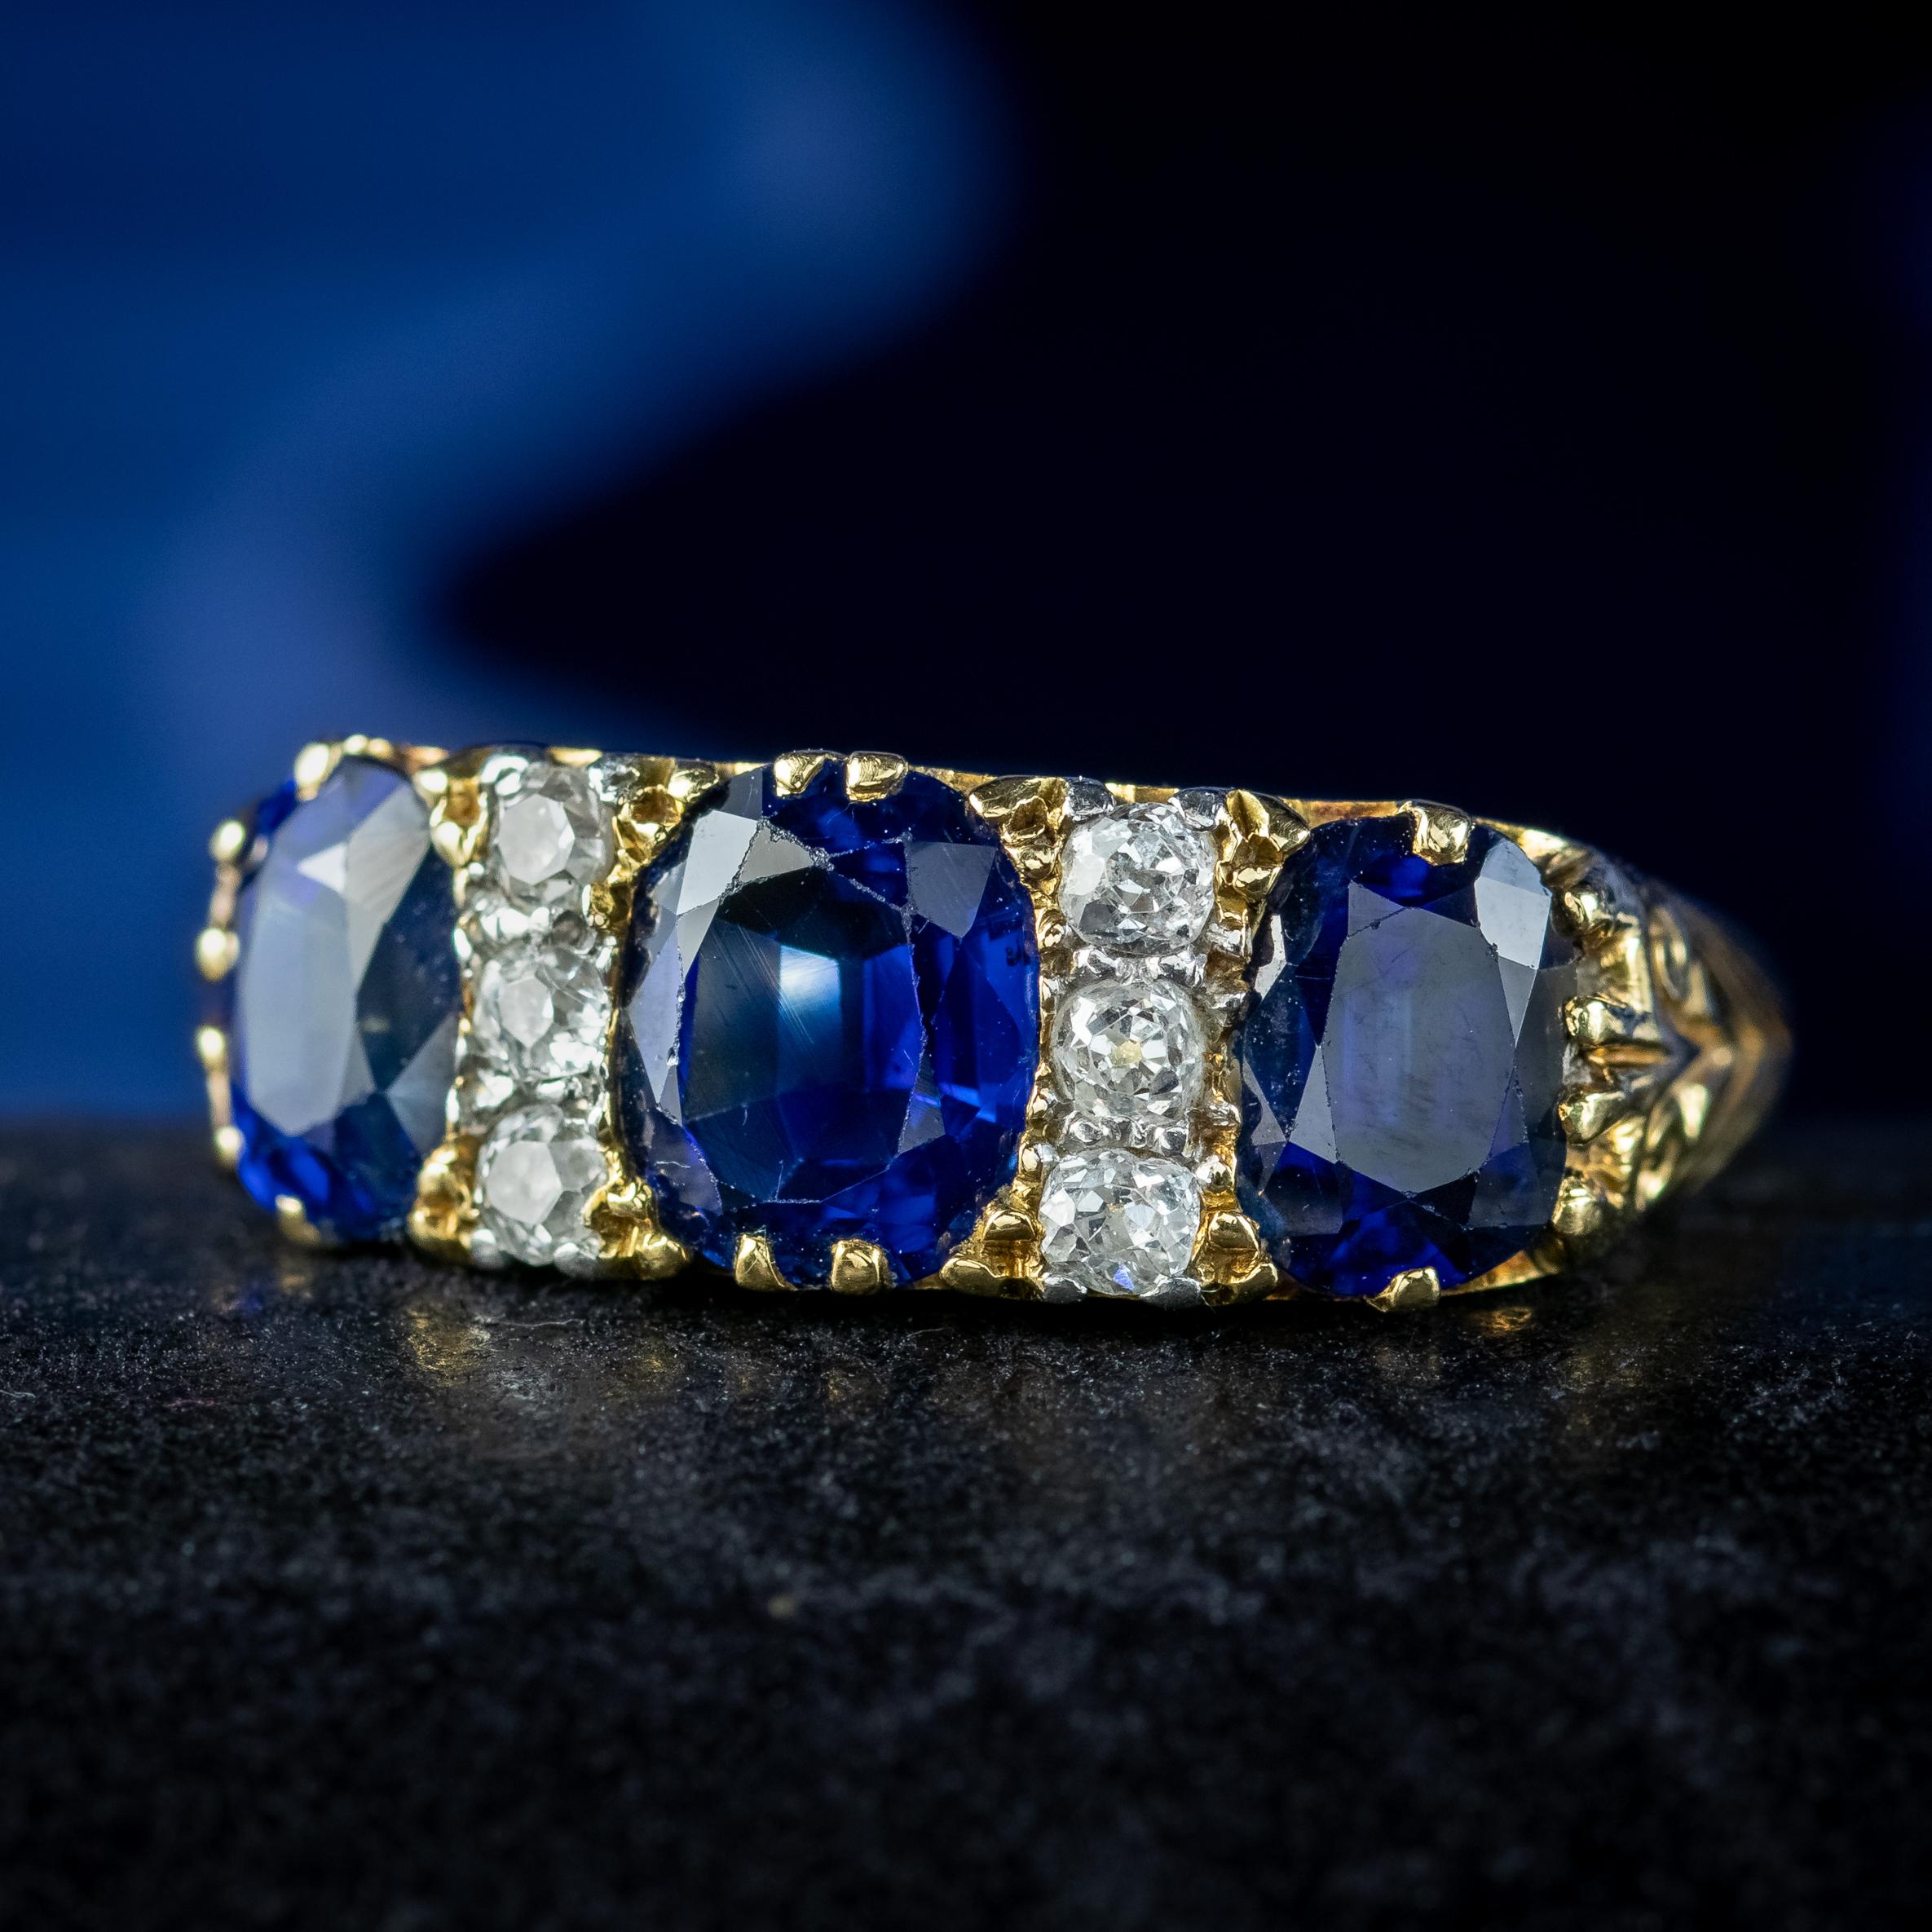 Antique Edwardian Sapphire Diamond Ring 2.7ct Sapphire With Cert For Sale 4